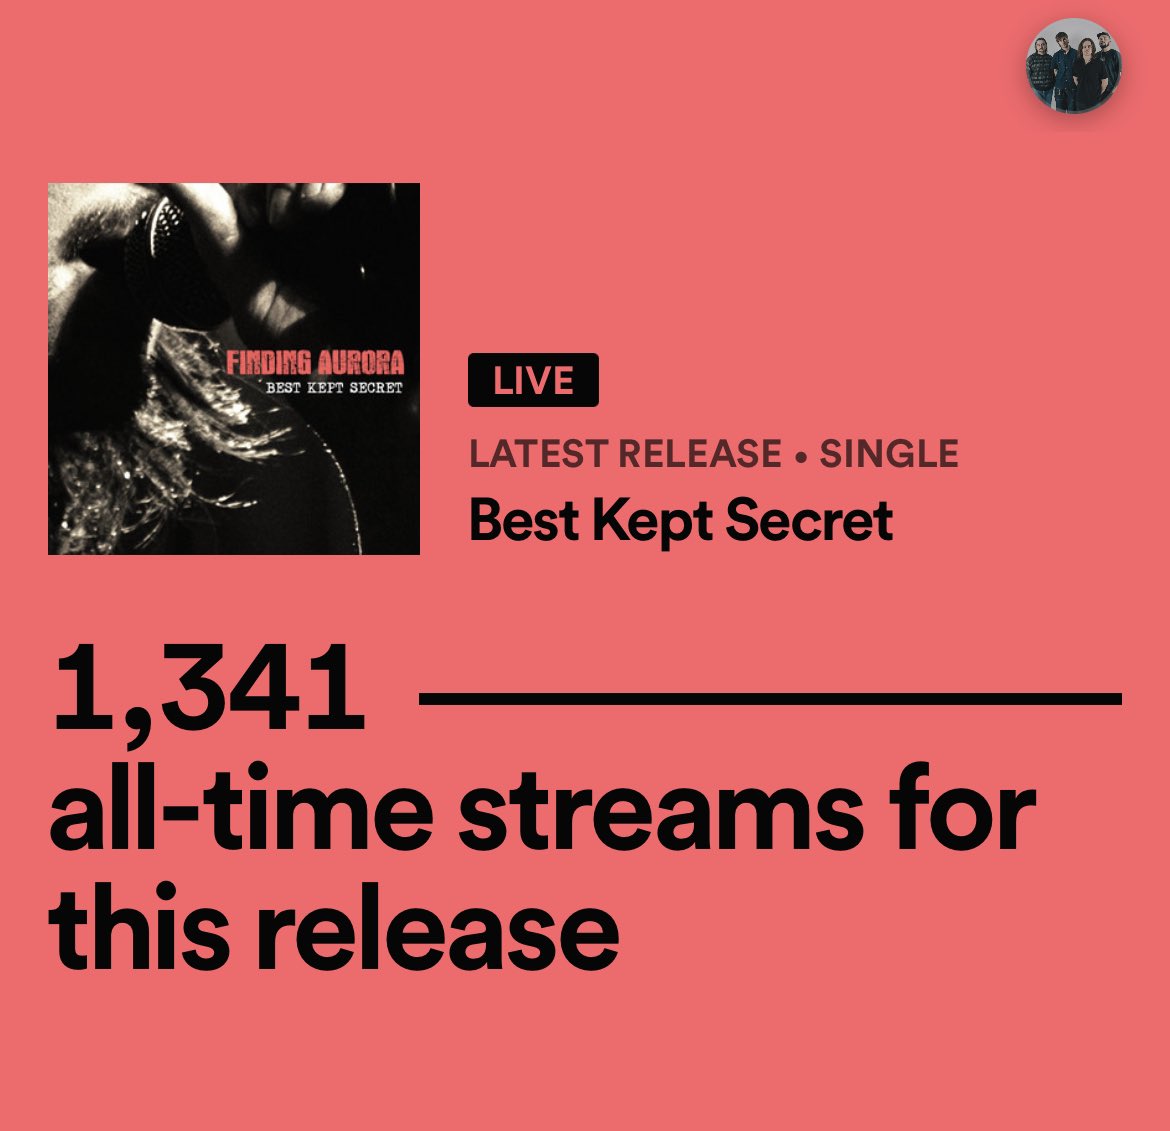 What a release day yesterday was for our new single. 💥🎚️ ‘Best Kept Secret’ has surpassed more than 1000 streams within its first 24 hours of release. Thank you so much to everyone who has listened and shared! News at 6pm. Stay tuned. 📸 @nathanielvisual